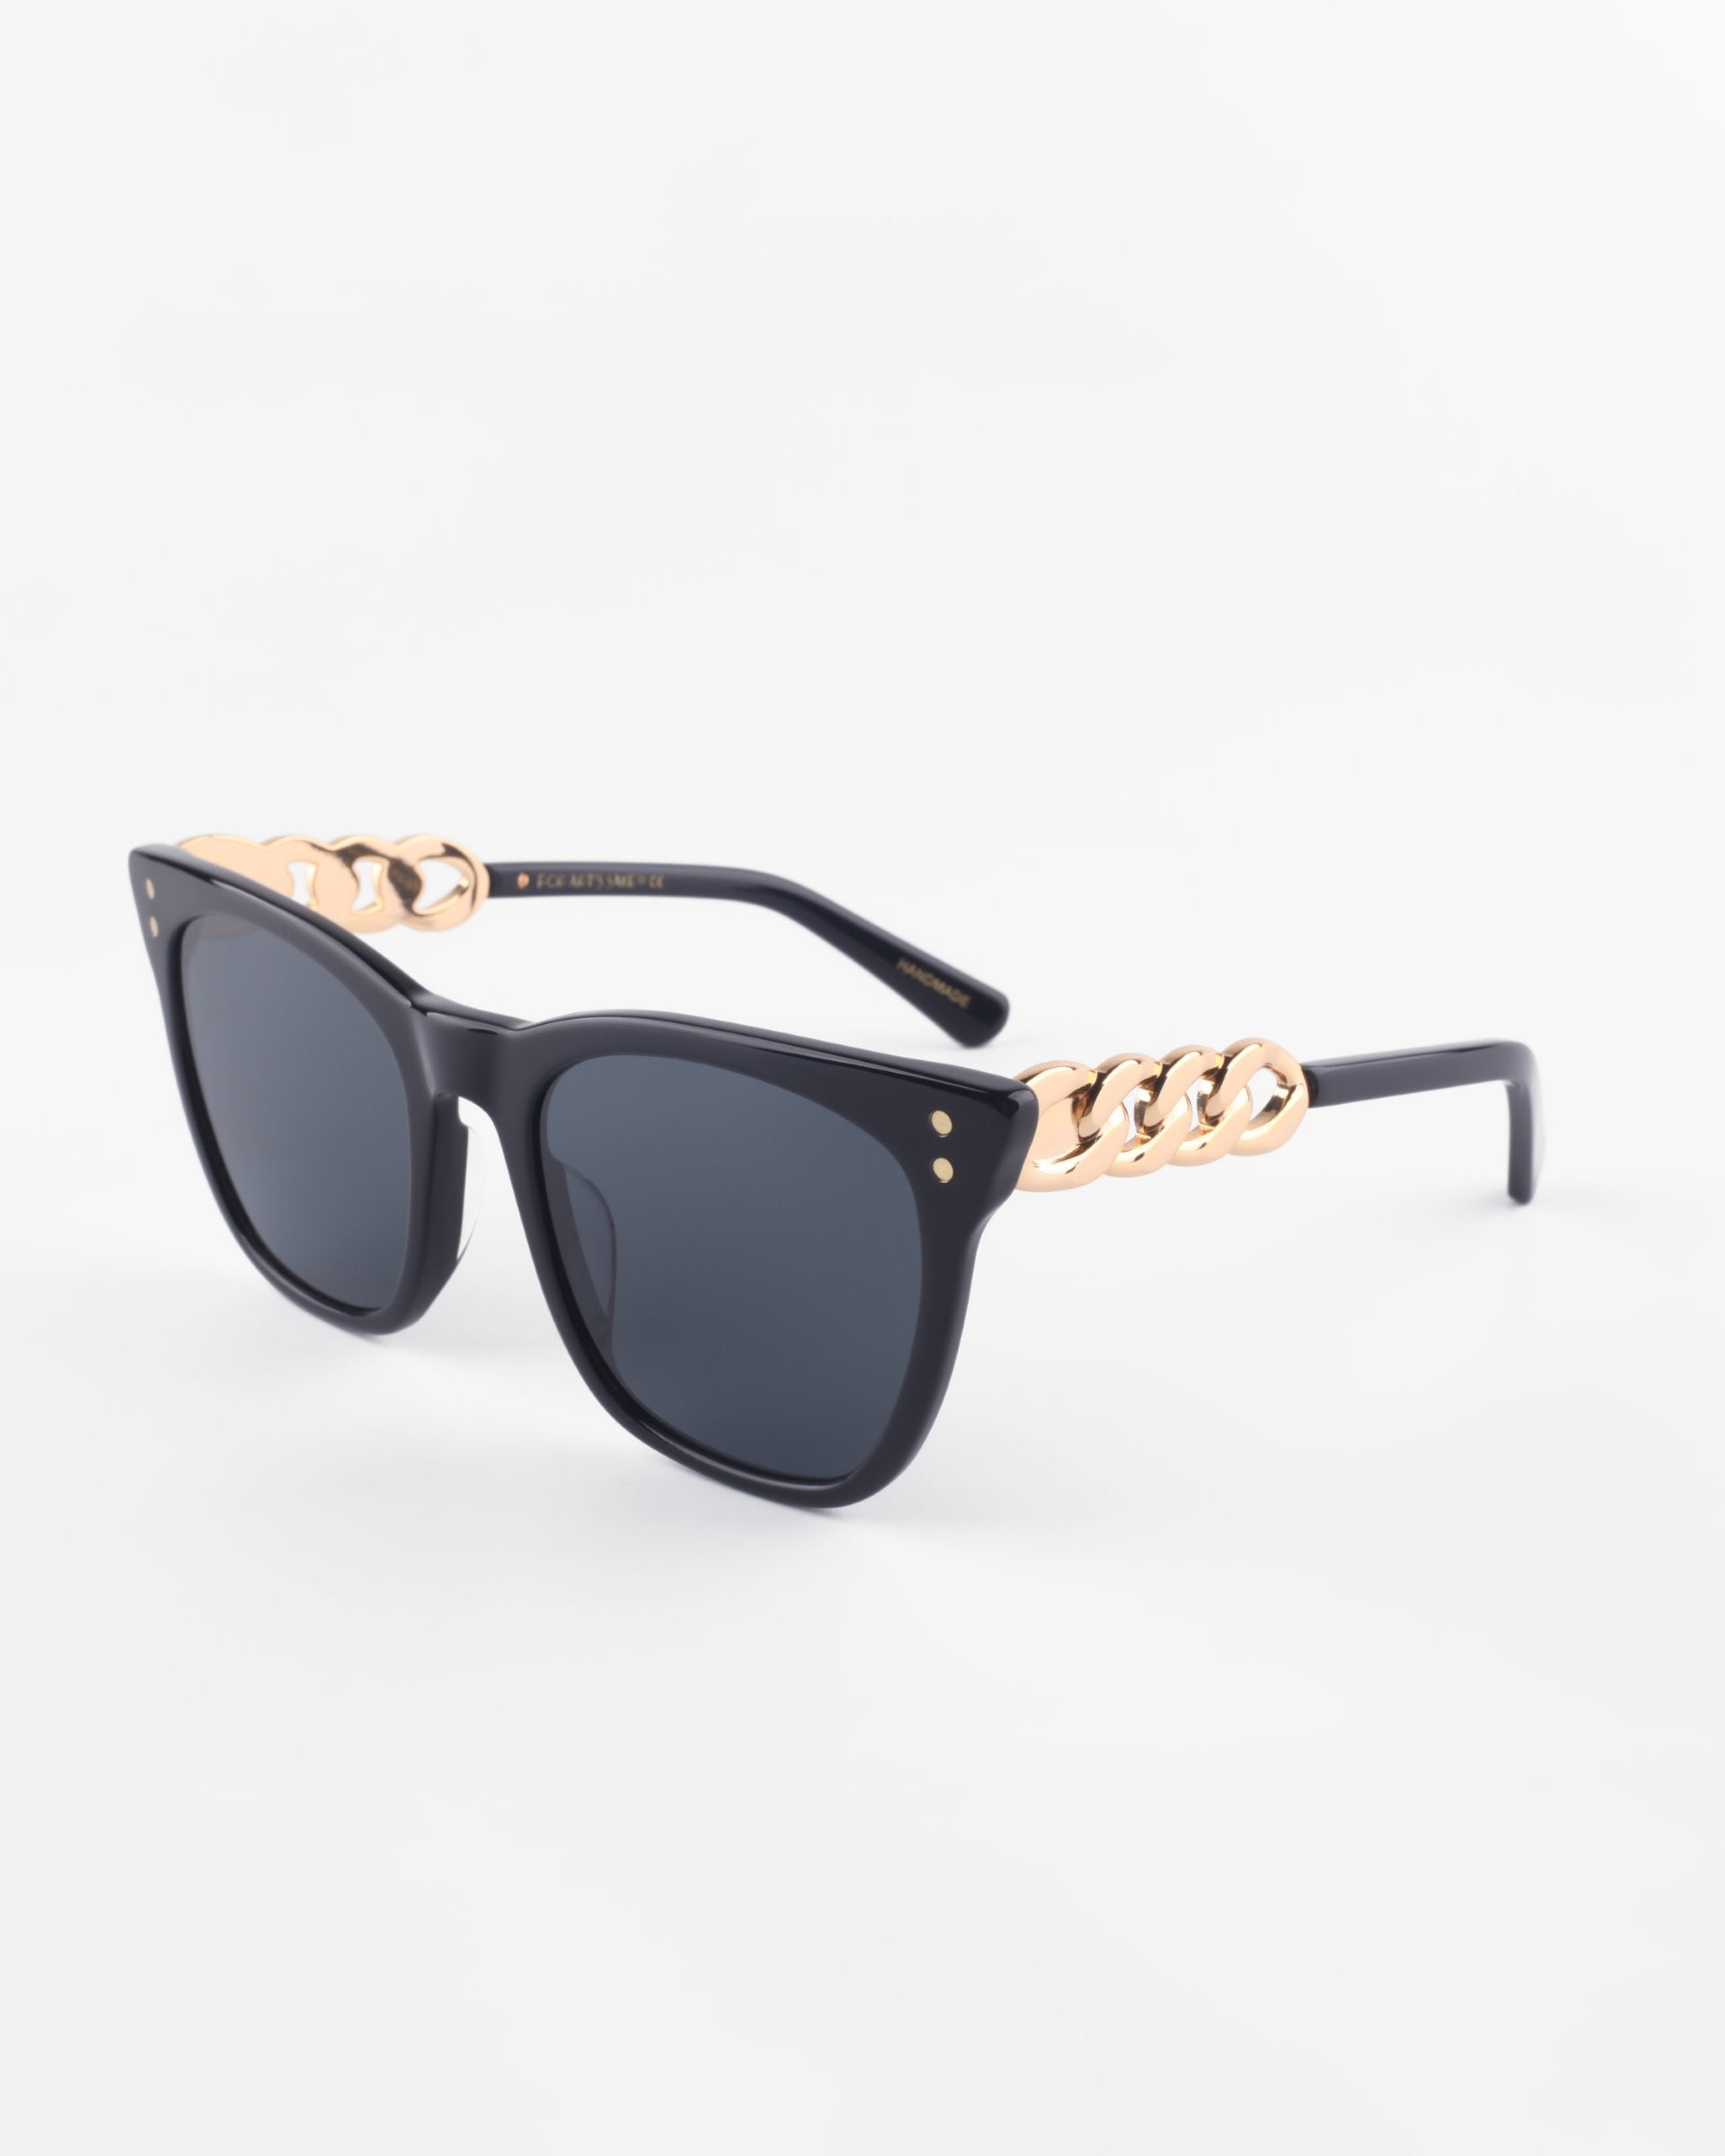 A pair of stylish black cat-eye Deco sunglasses with dark lenses from For Art's Sake®. The acetate temples feature a unique design with chunky gold chain links near the hinges, adding a touch of luxury to the classic black frames. The background is plain white.